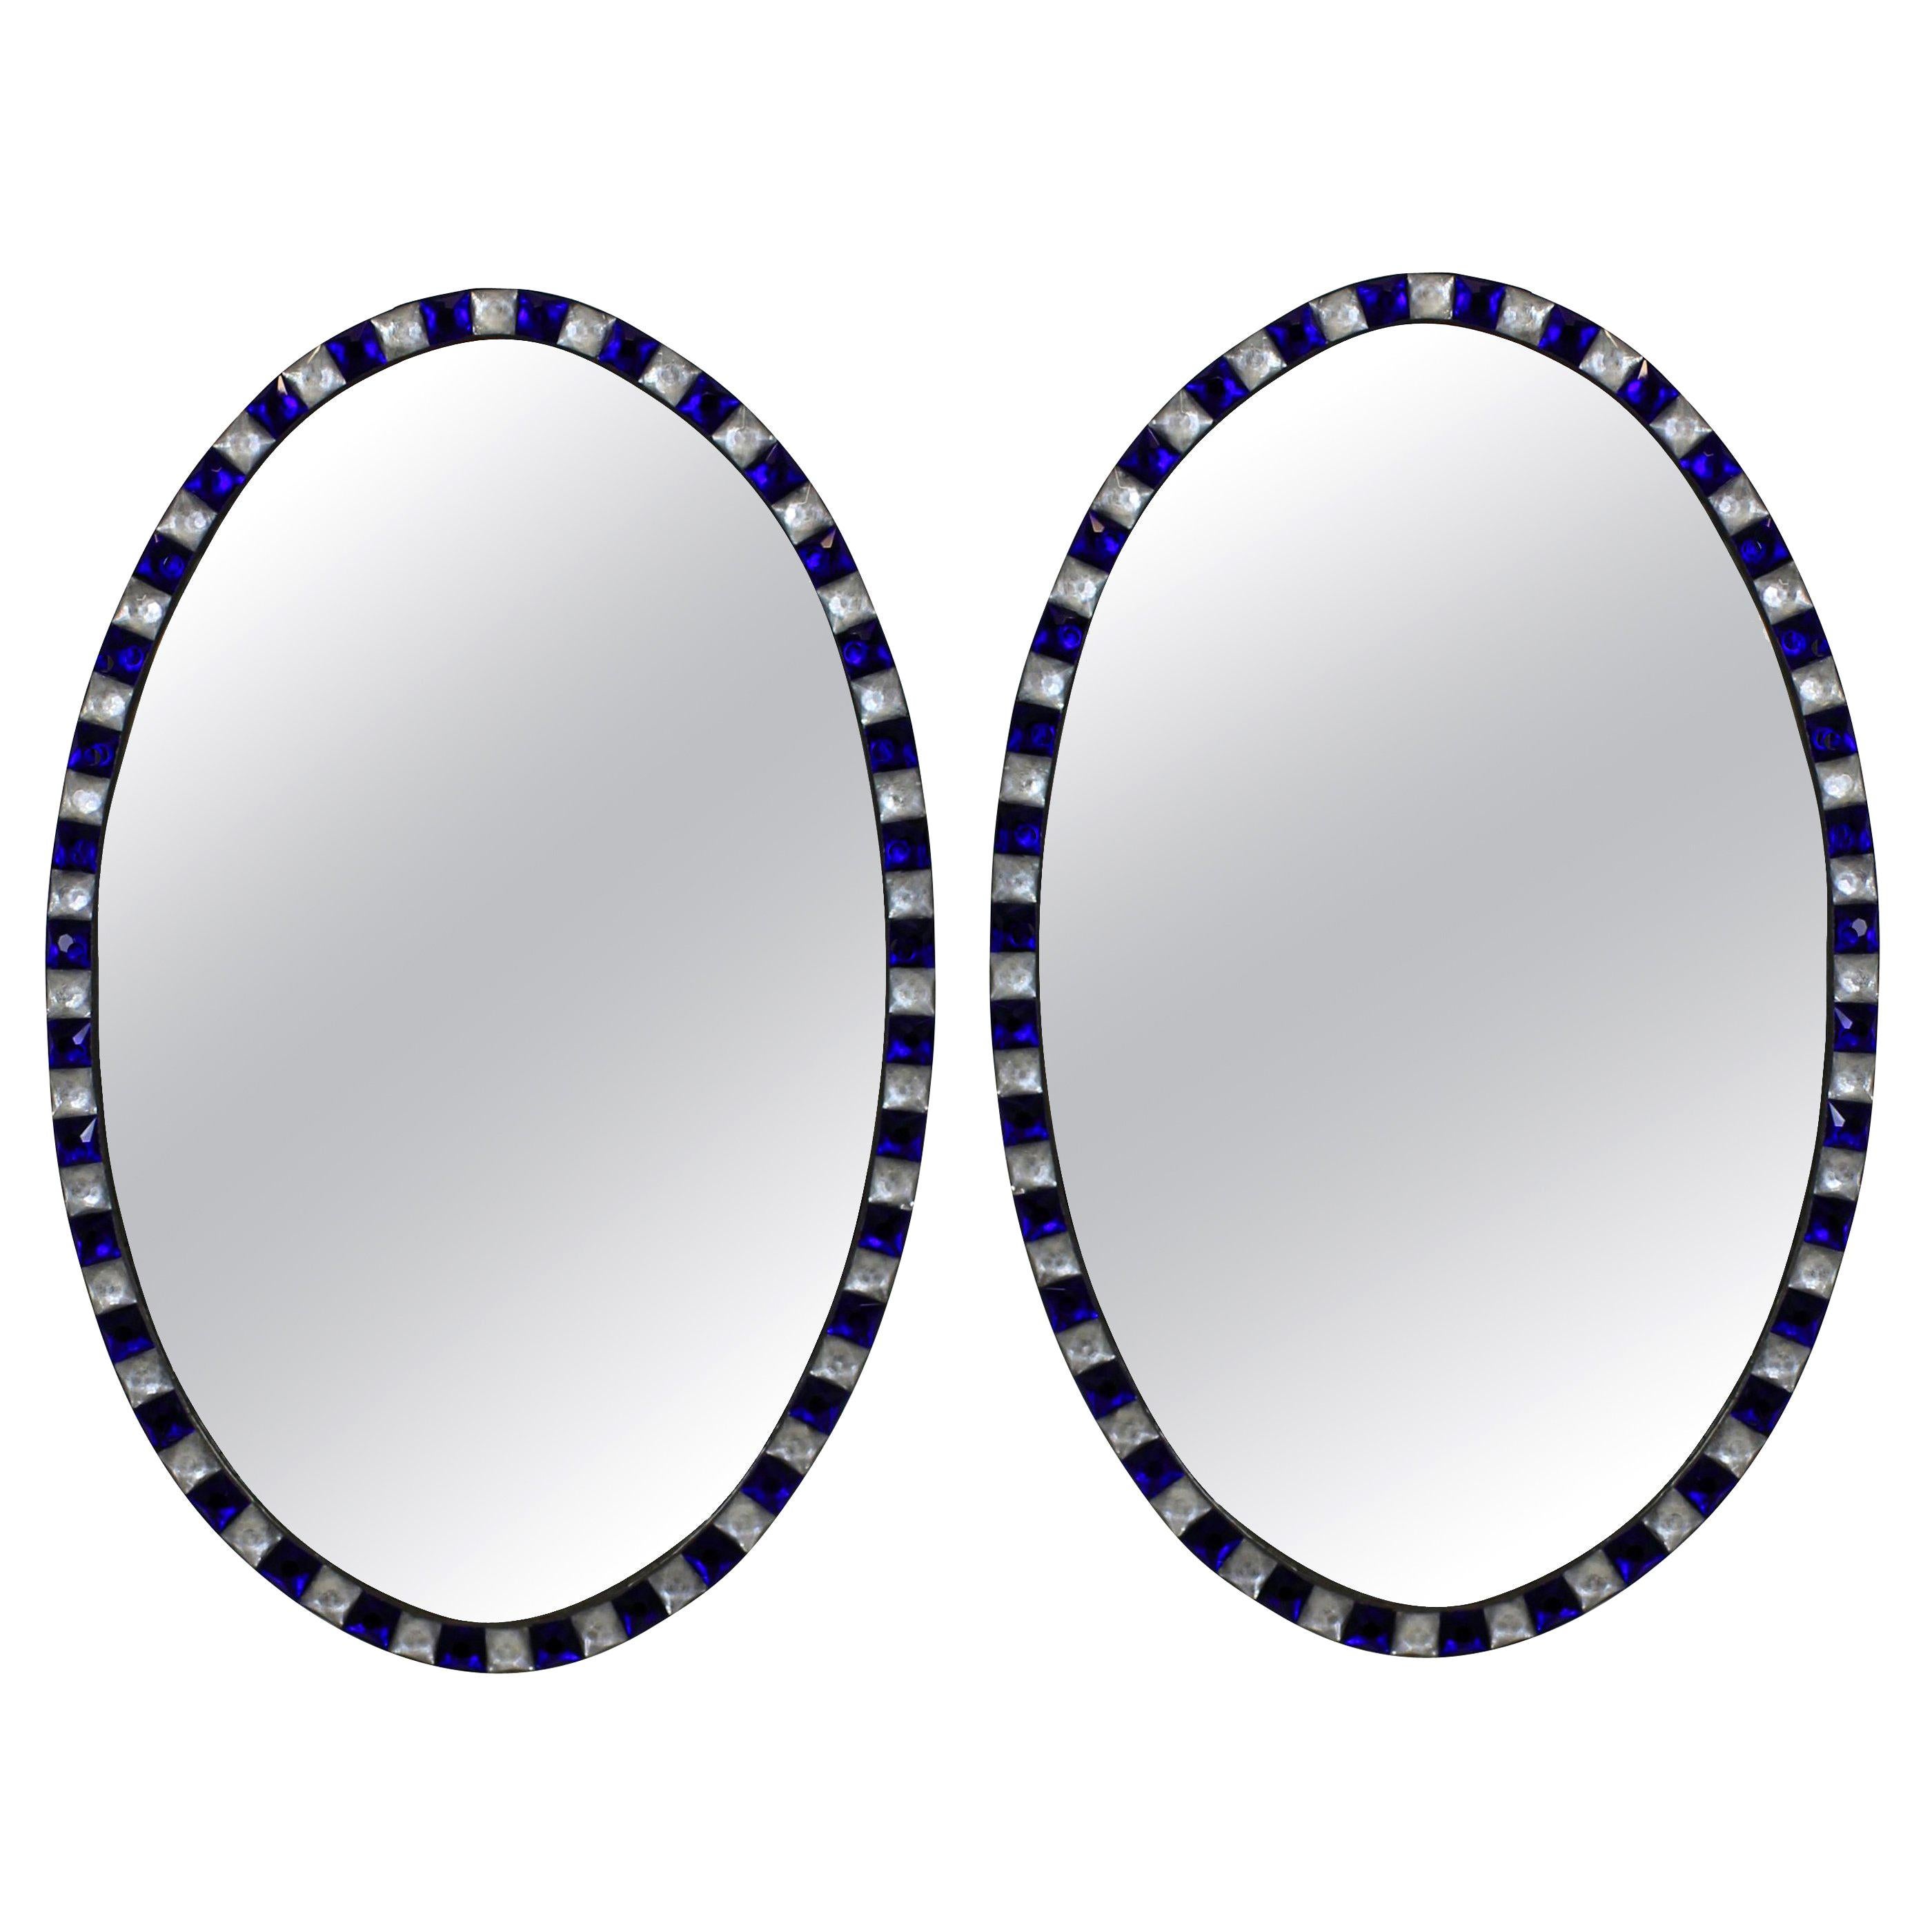 Pair of Stunning Irish Mirrors with Faceted Rock Crystal and Blu Glass Borders